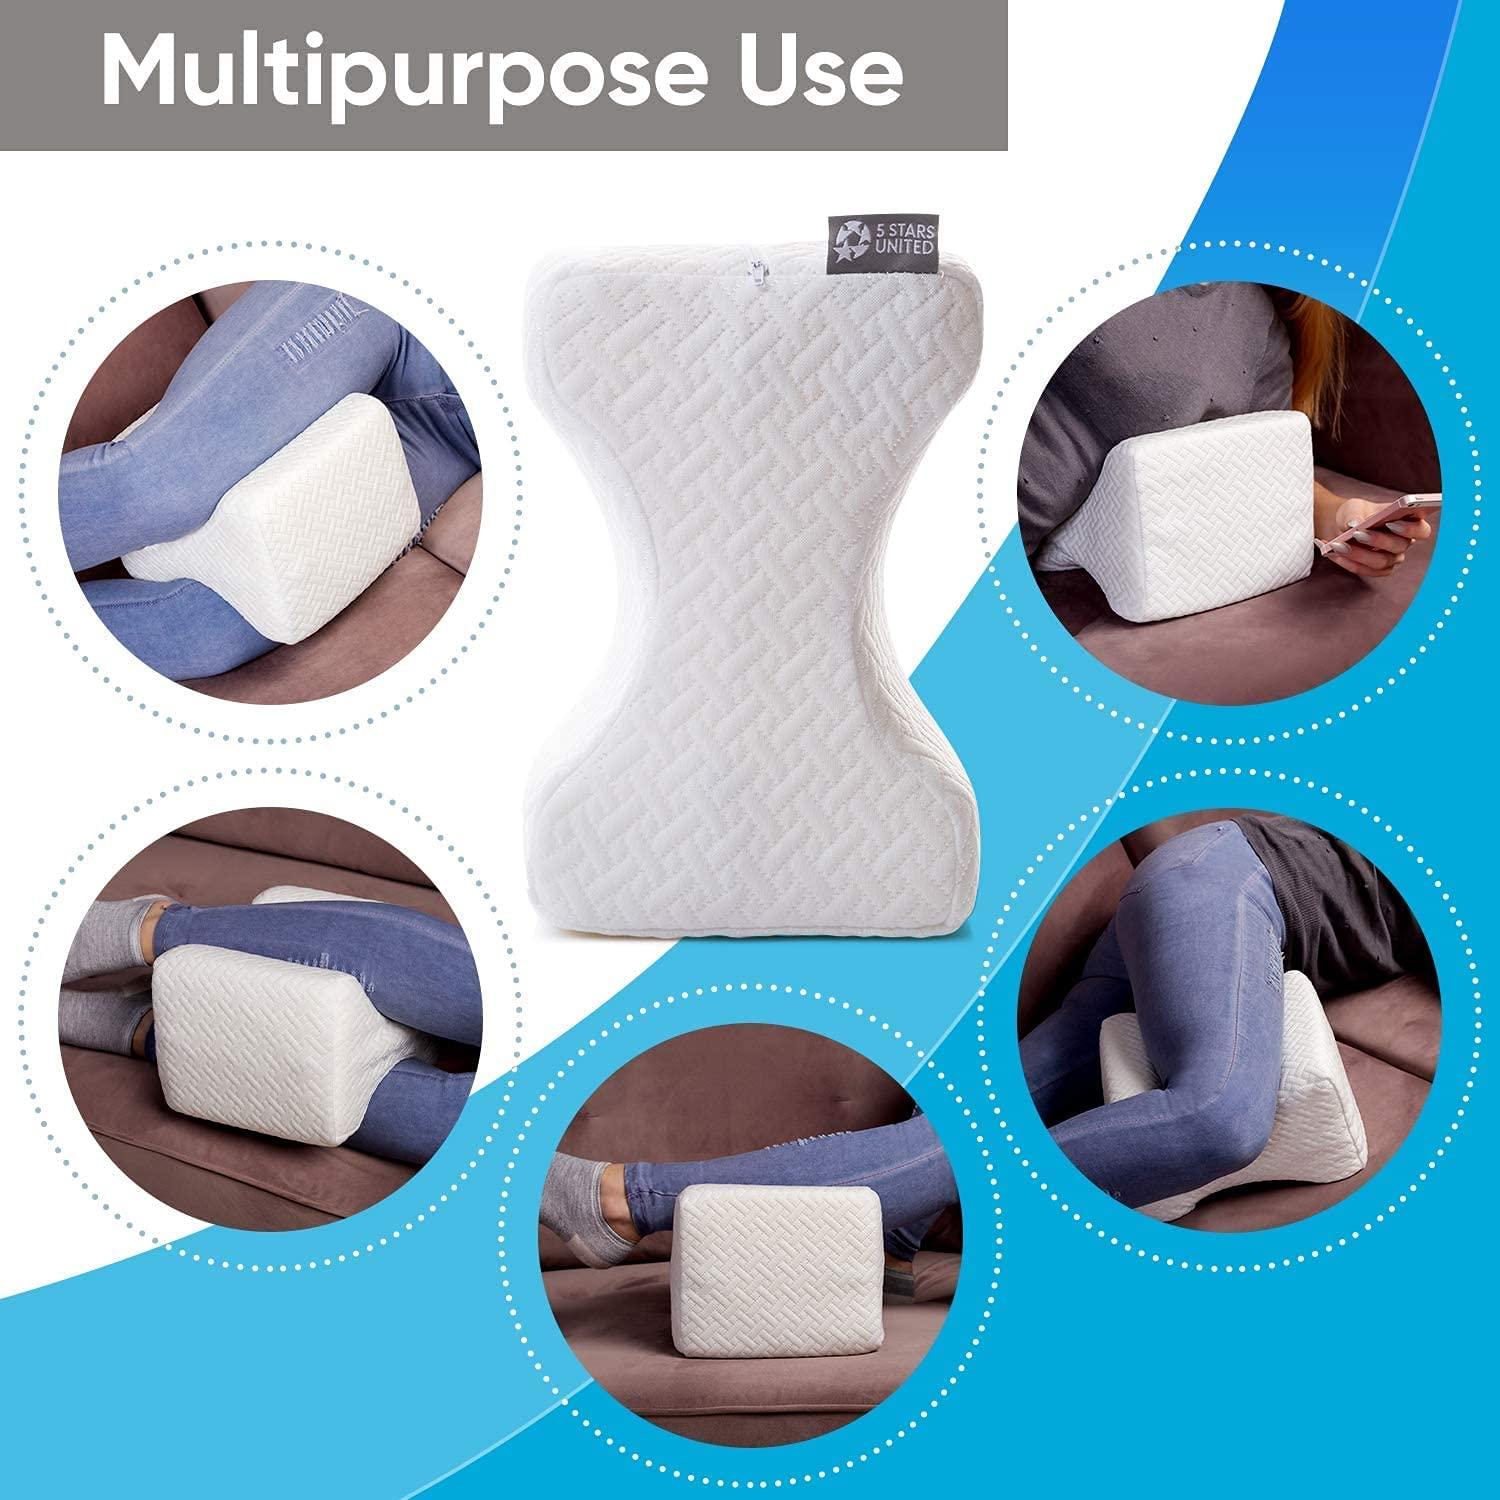 S-SNAIL-OO Knee Pillow for Side Sleepers Hip Pain(27x13x3in) Leg Pillow  Sleep Cushion for Lower Back Pain Relief, Pregnancy Support